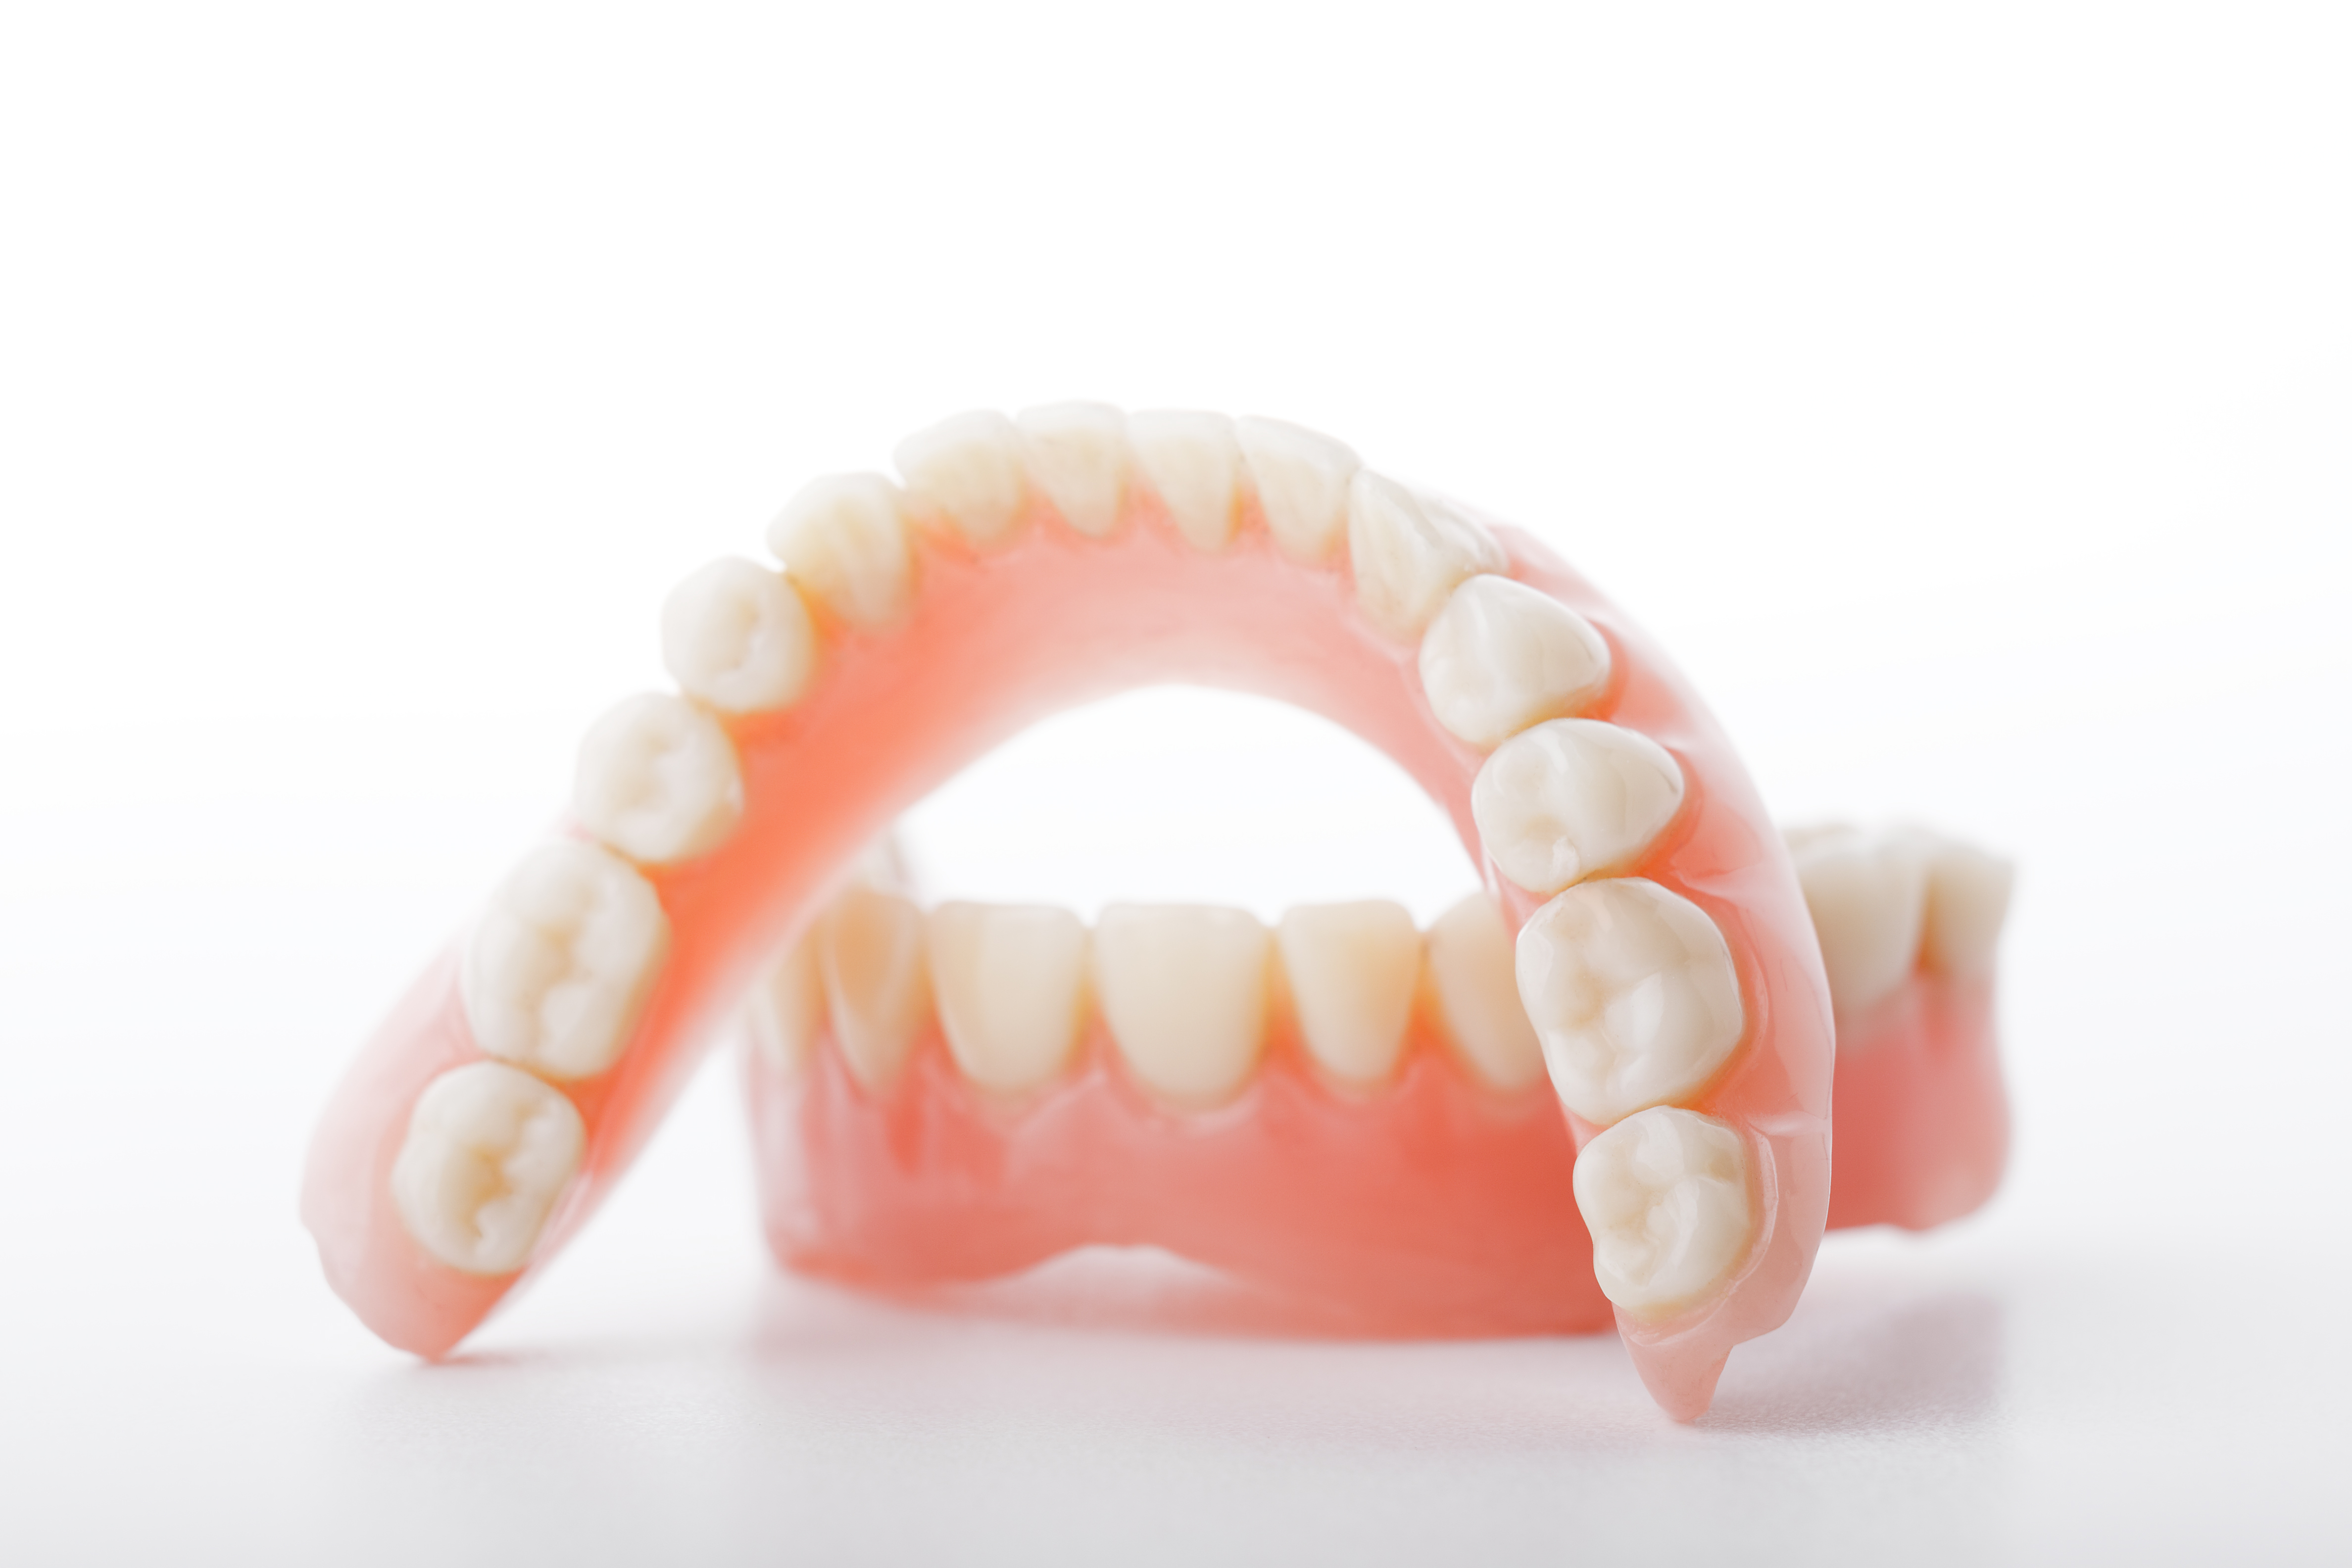 implant supported dentures South Bend, IN